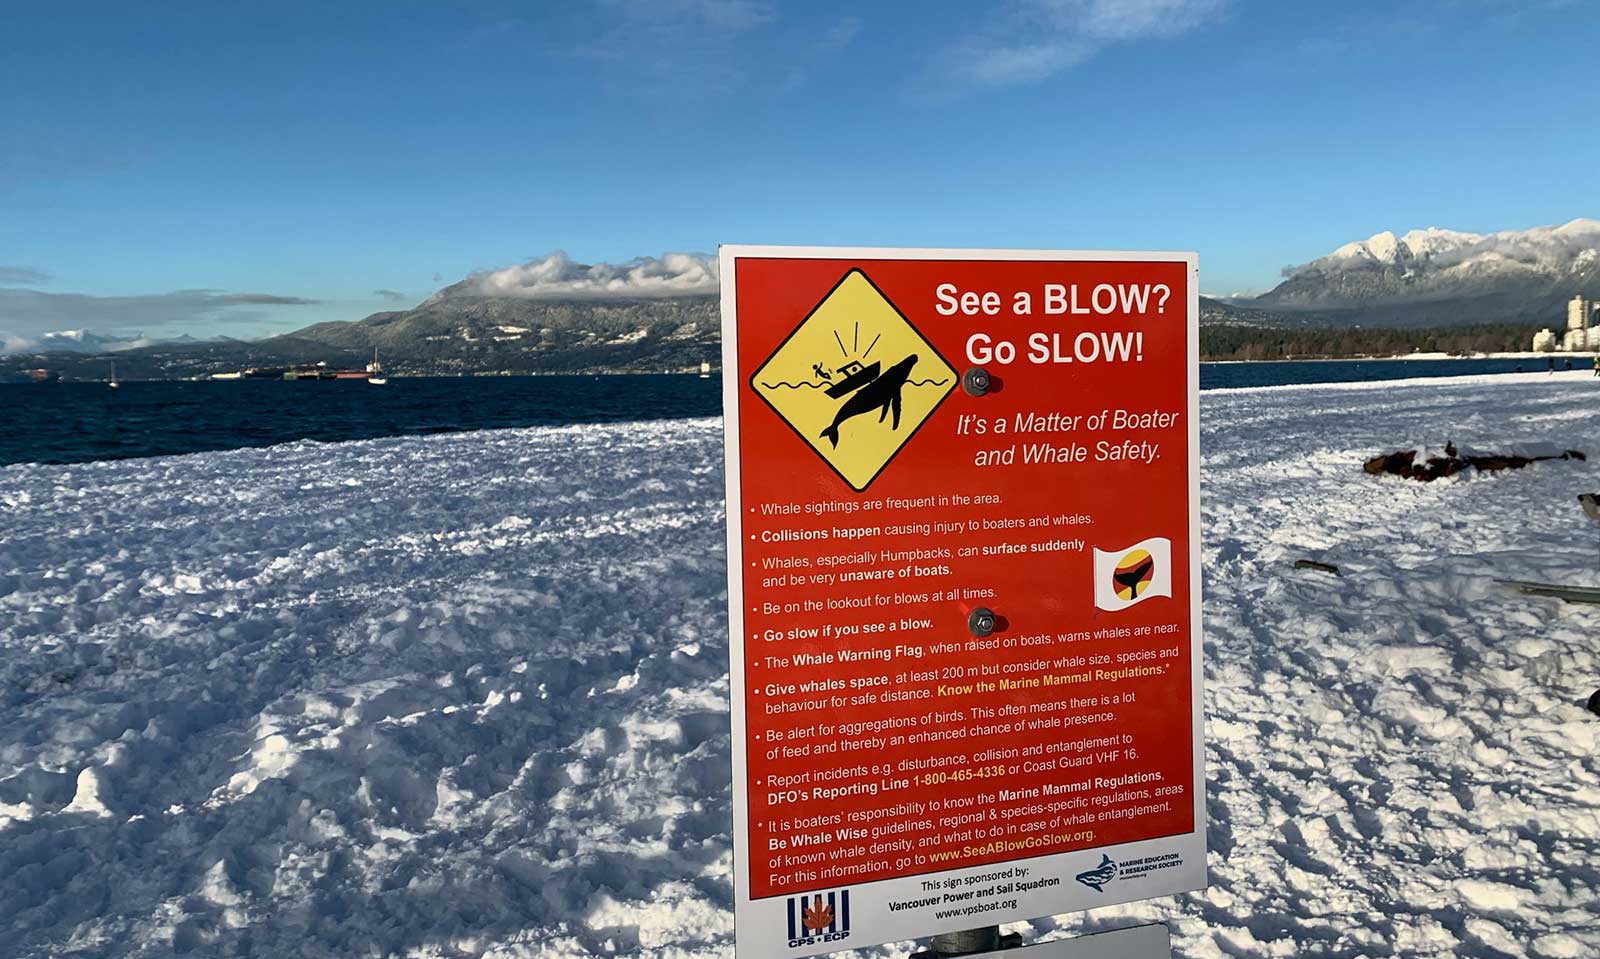 mers marine education research society see a blow go slow sign sponsored by canadian power and sail squadron